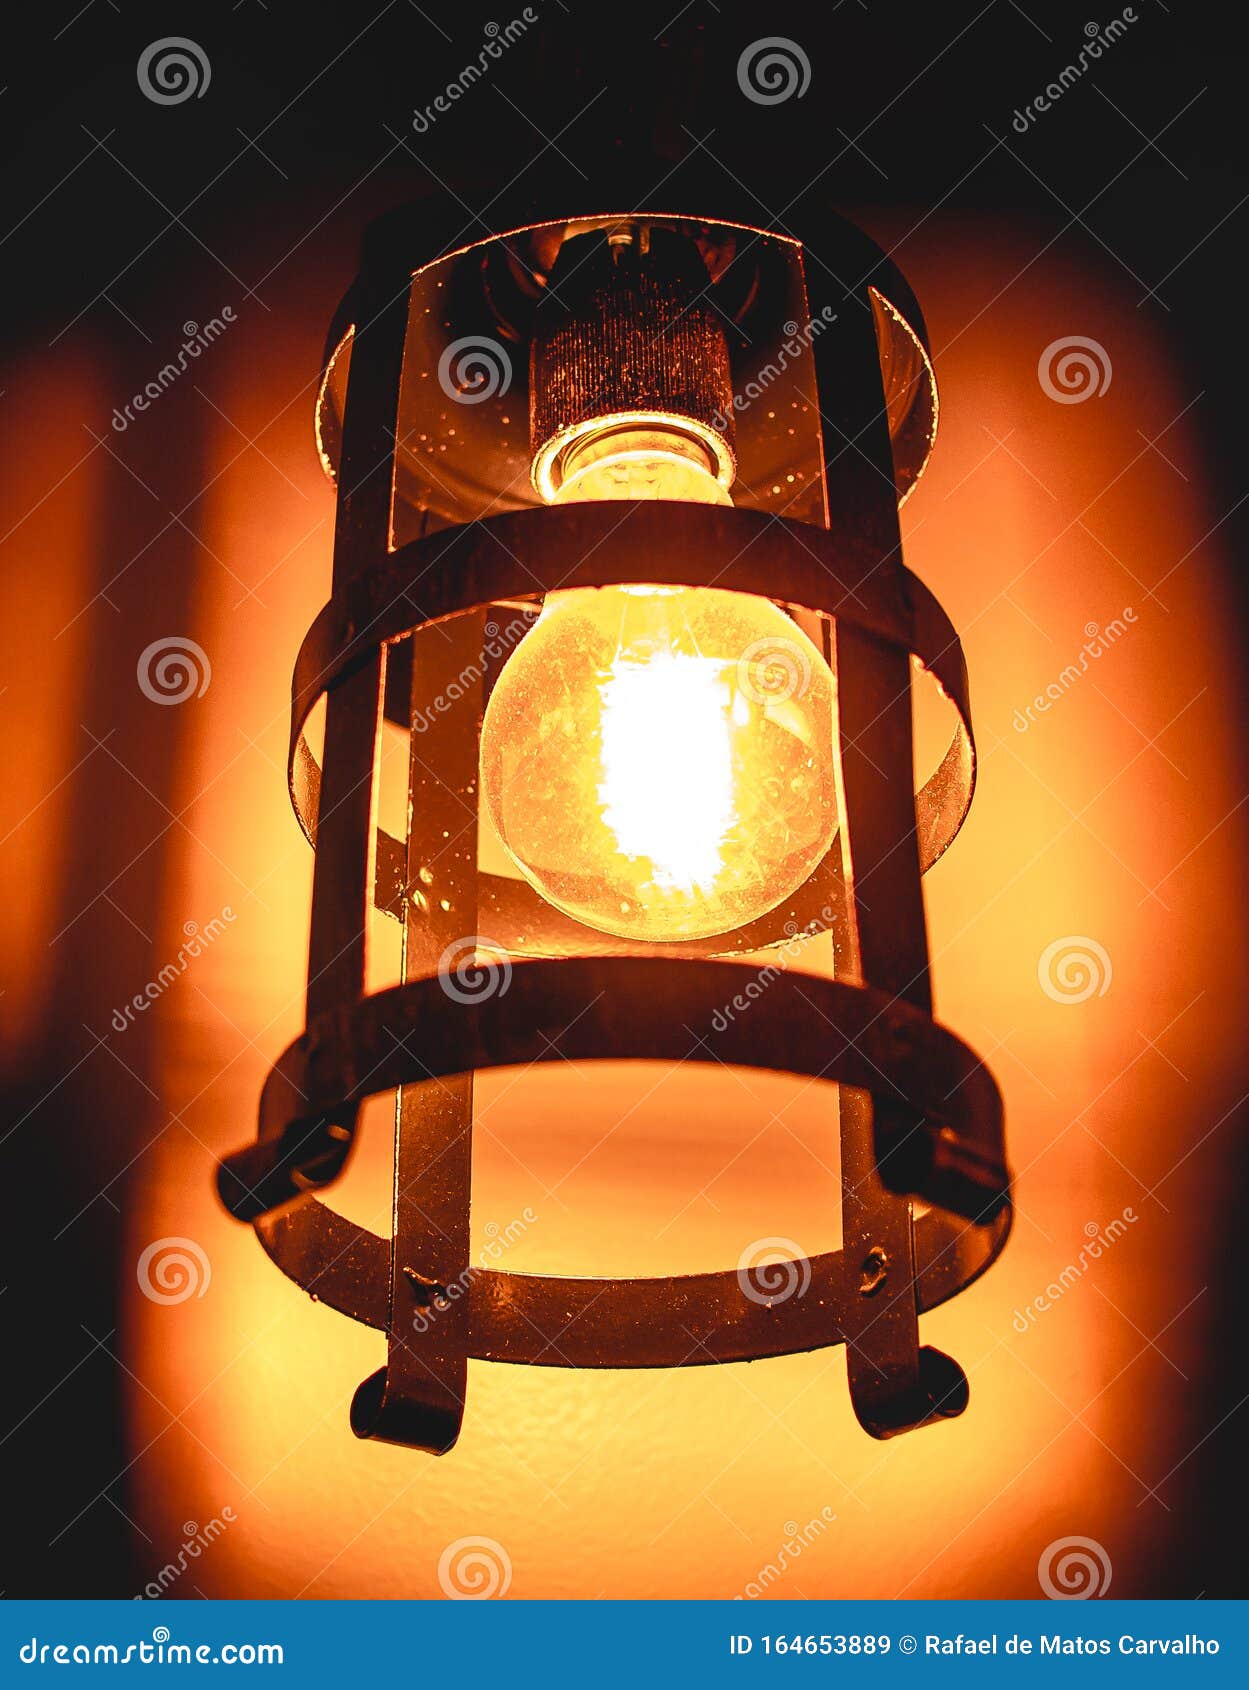 photo of an incandescent lamp light on in rustic support.